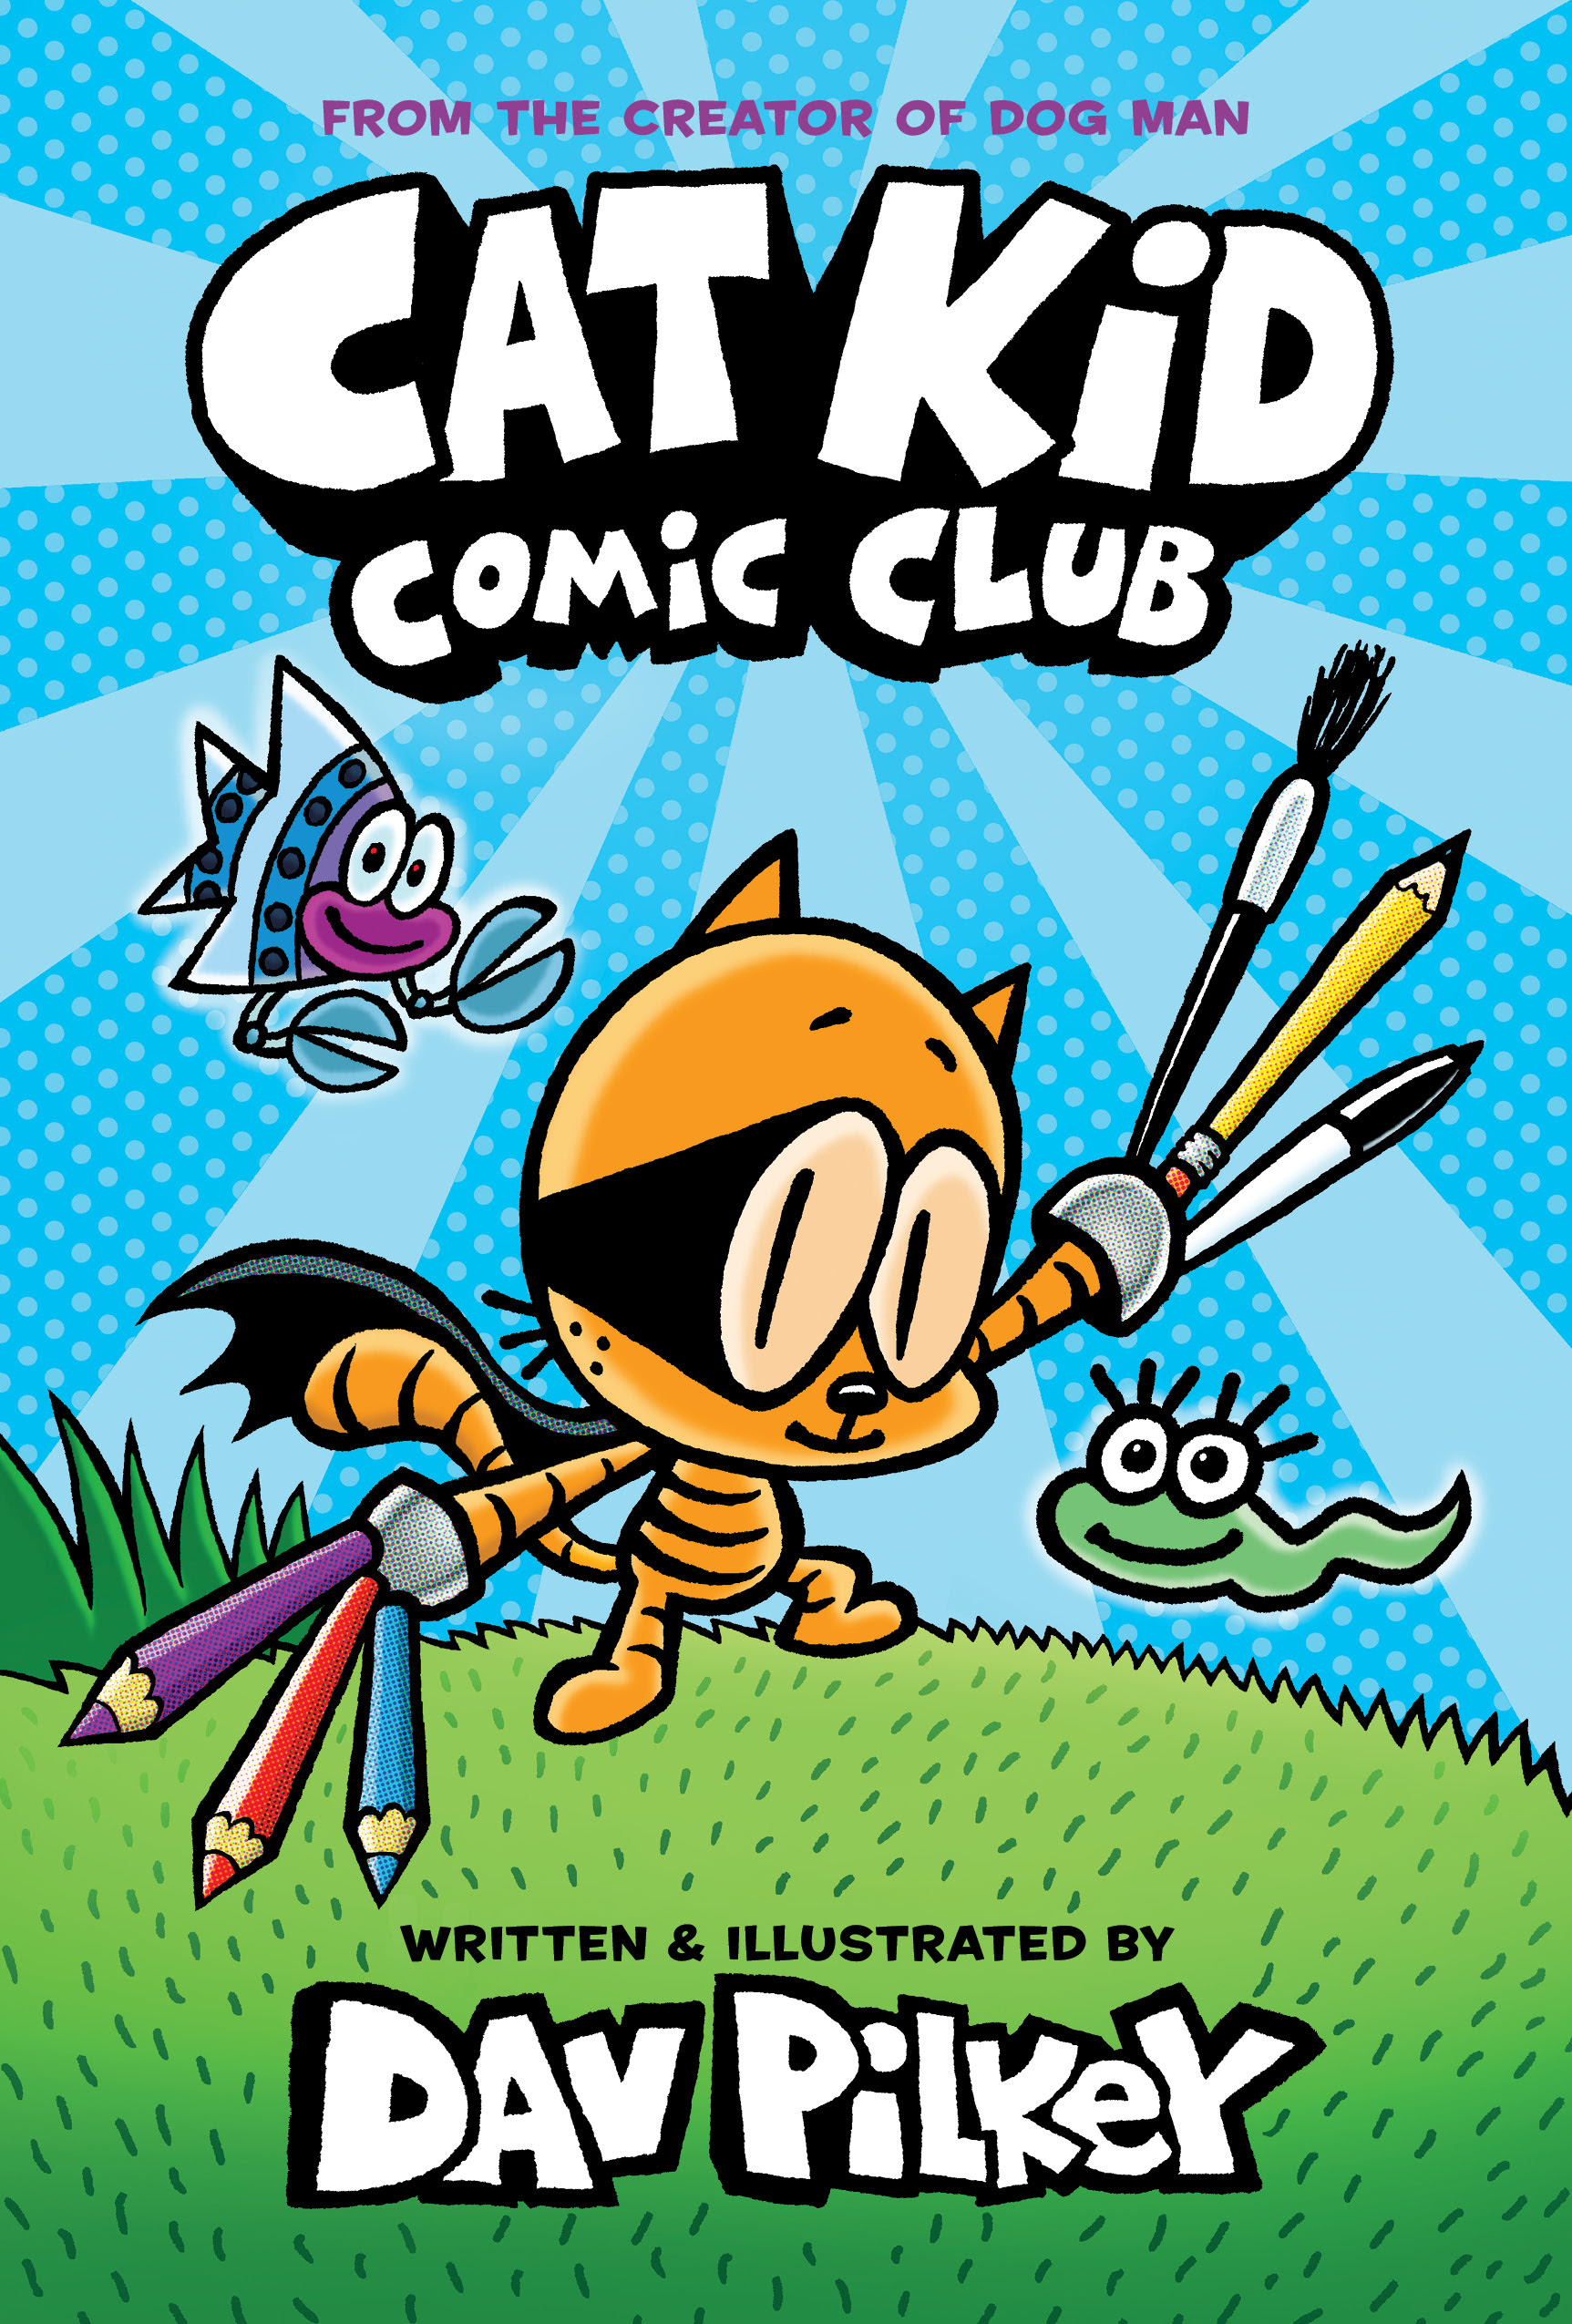 pdf download Cat Kid Comic Club: From the Creator of Dog Man